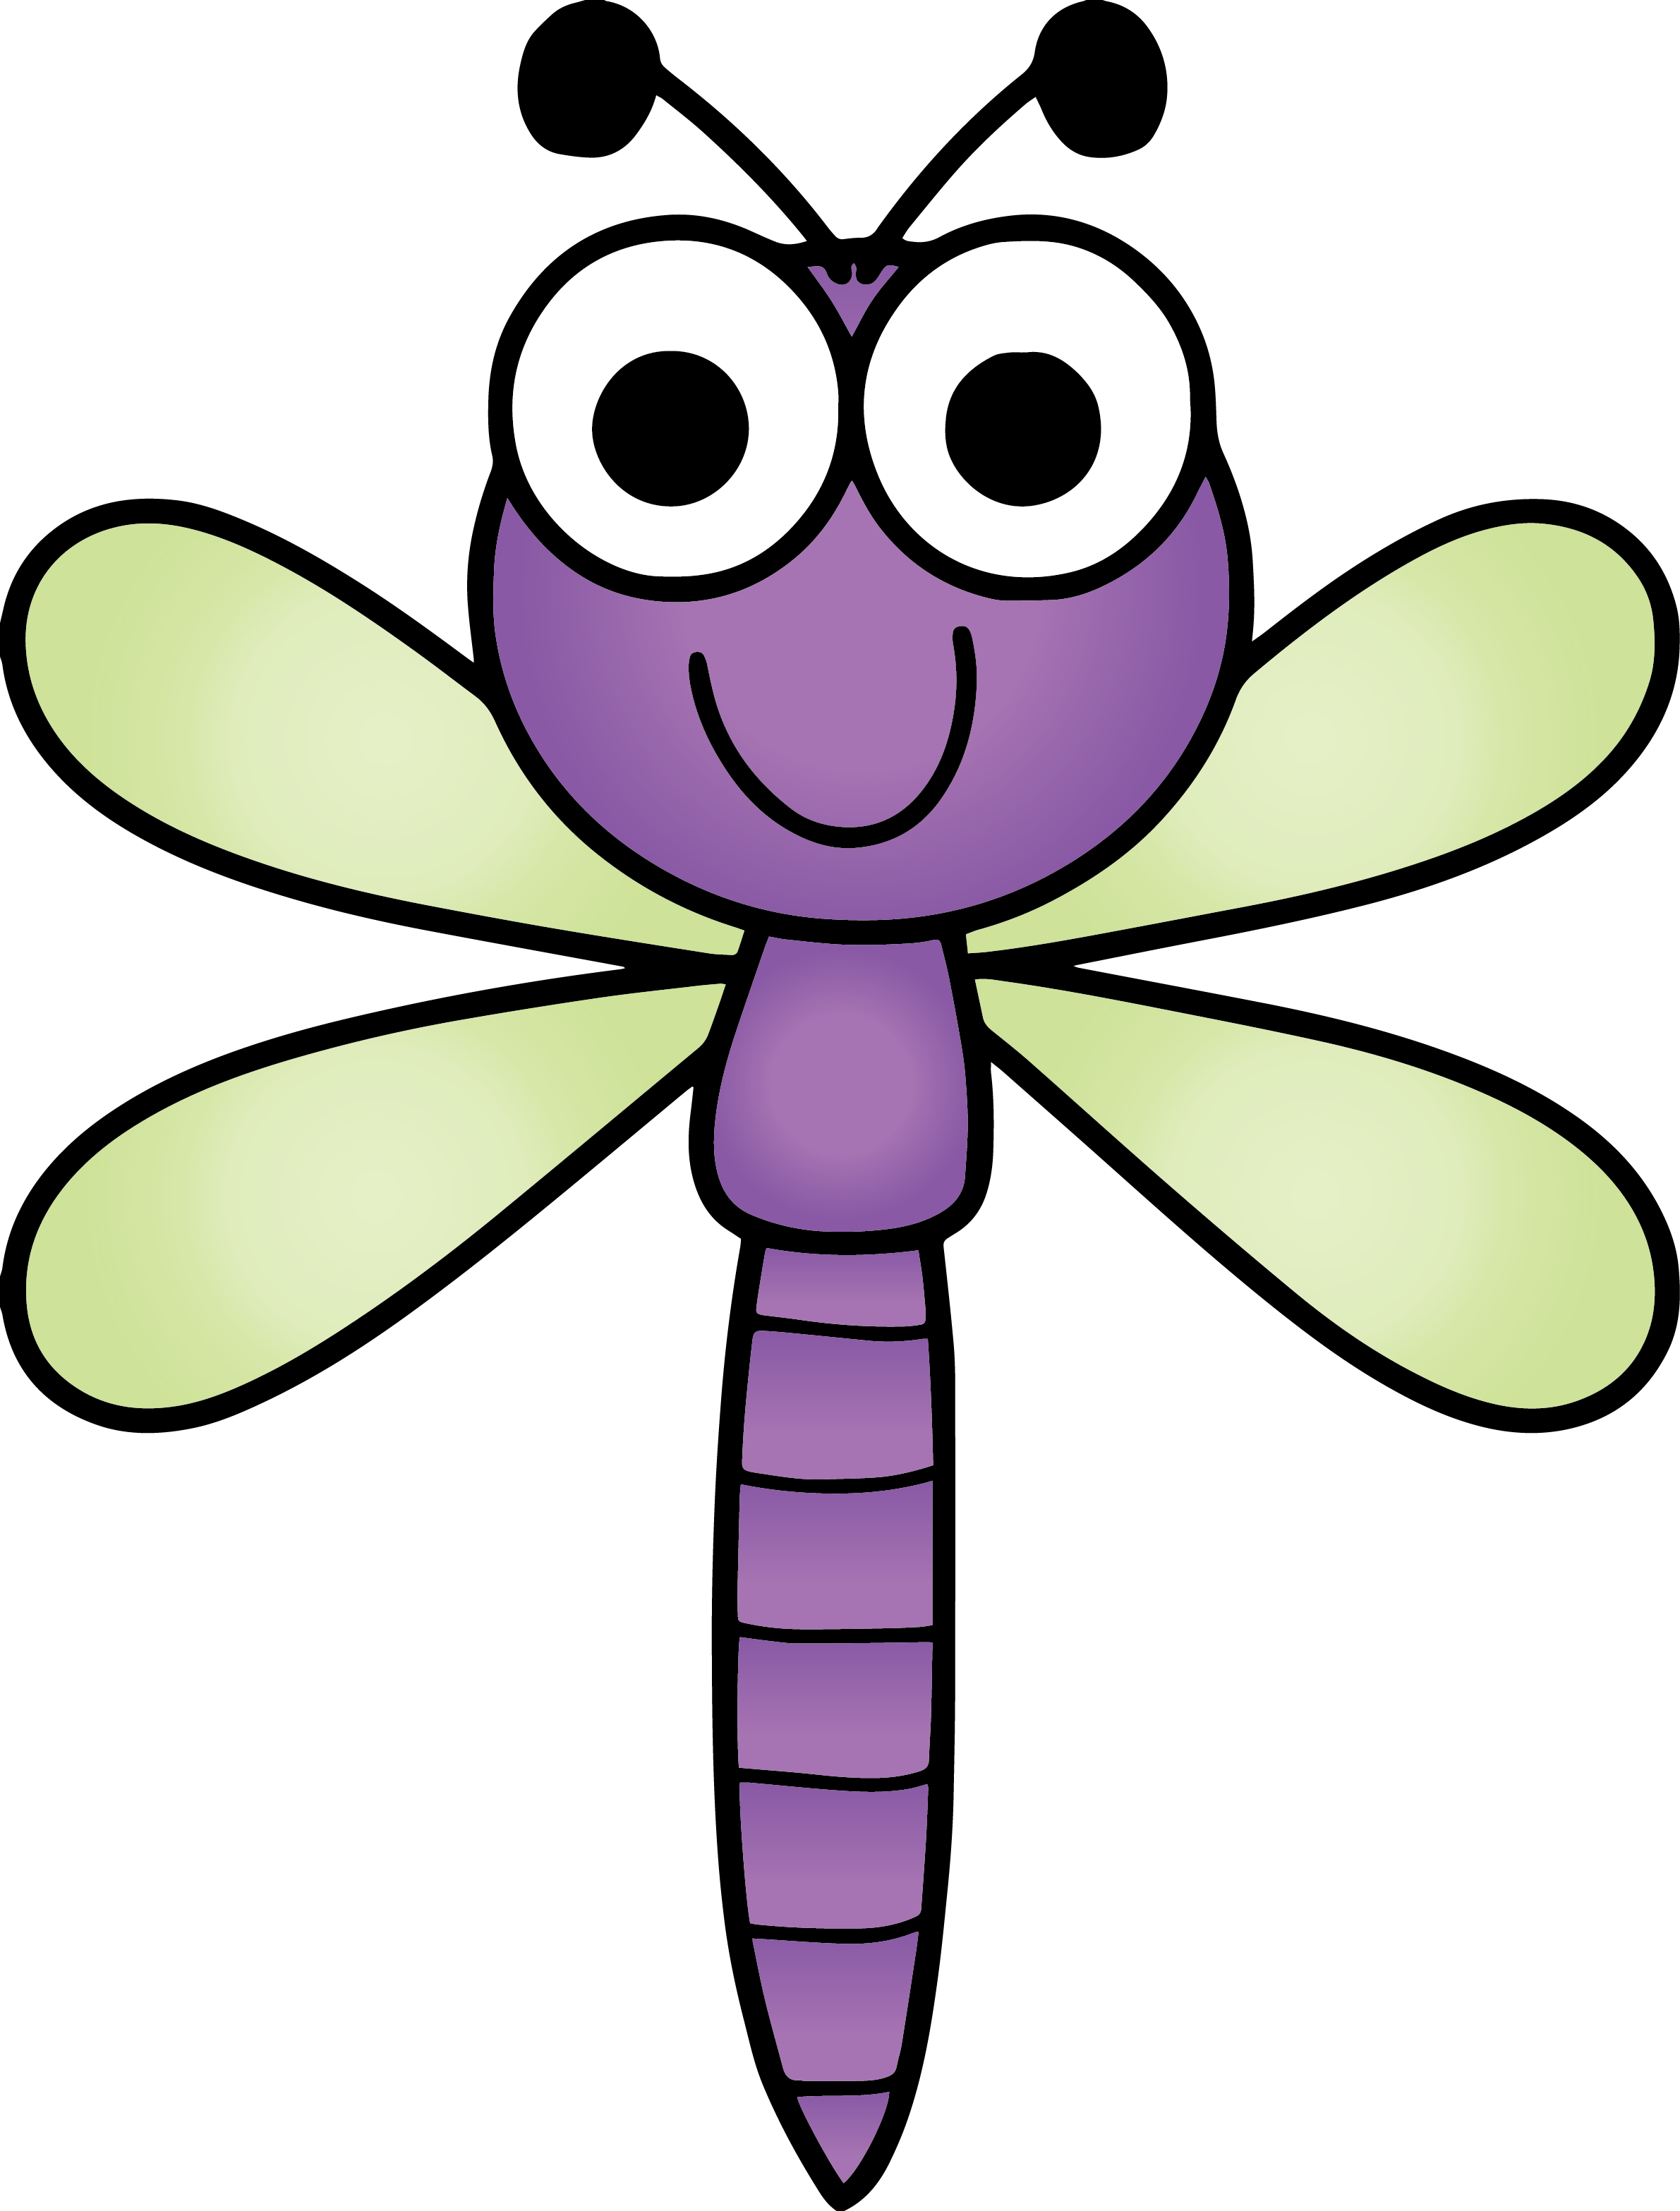 mosquito clipart animated